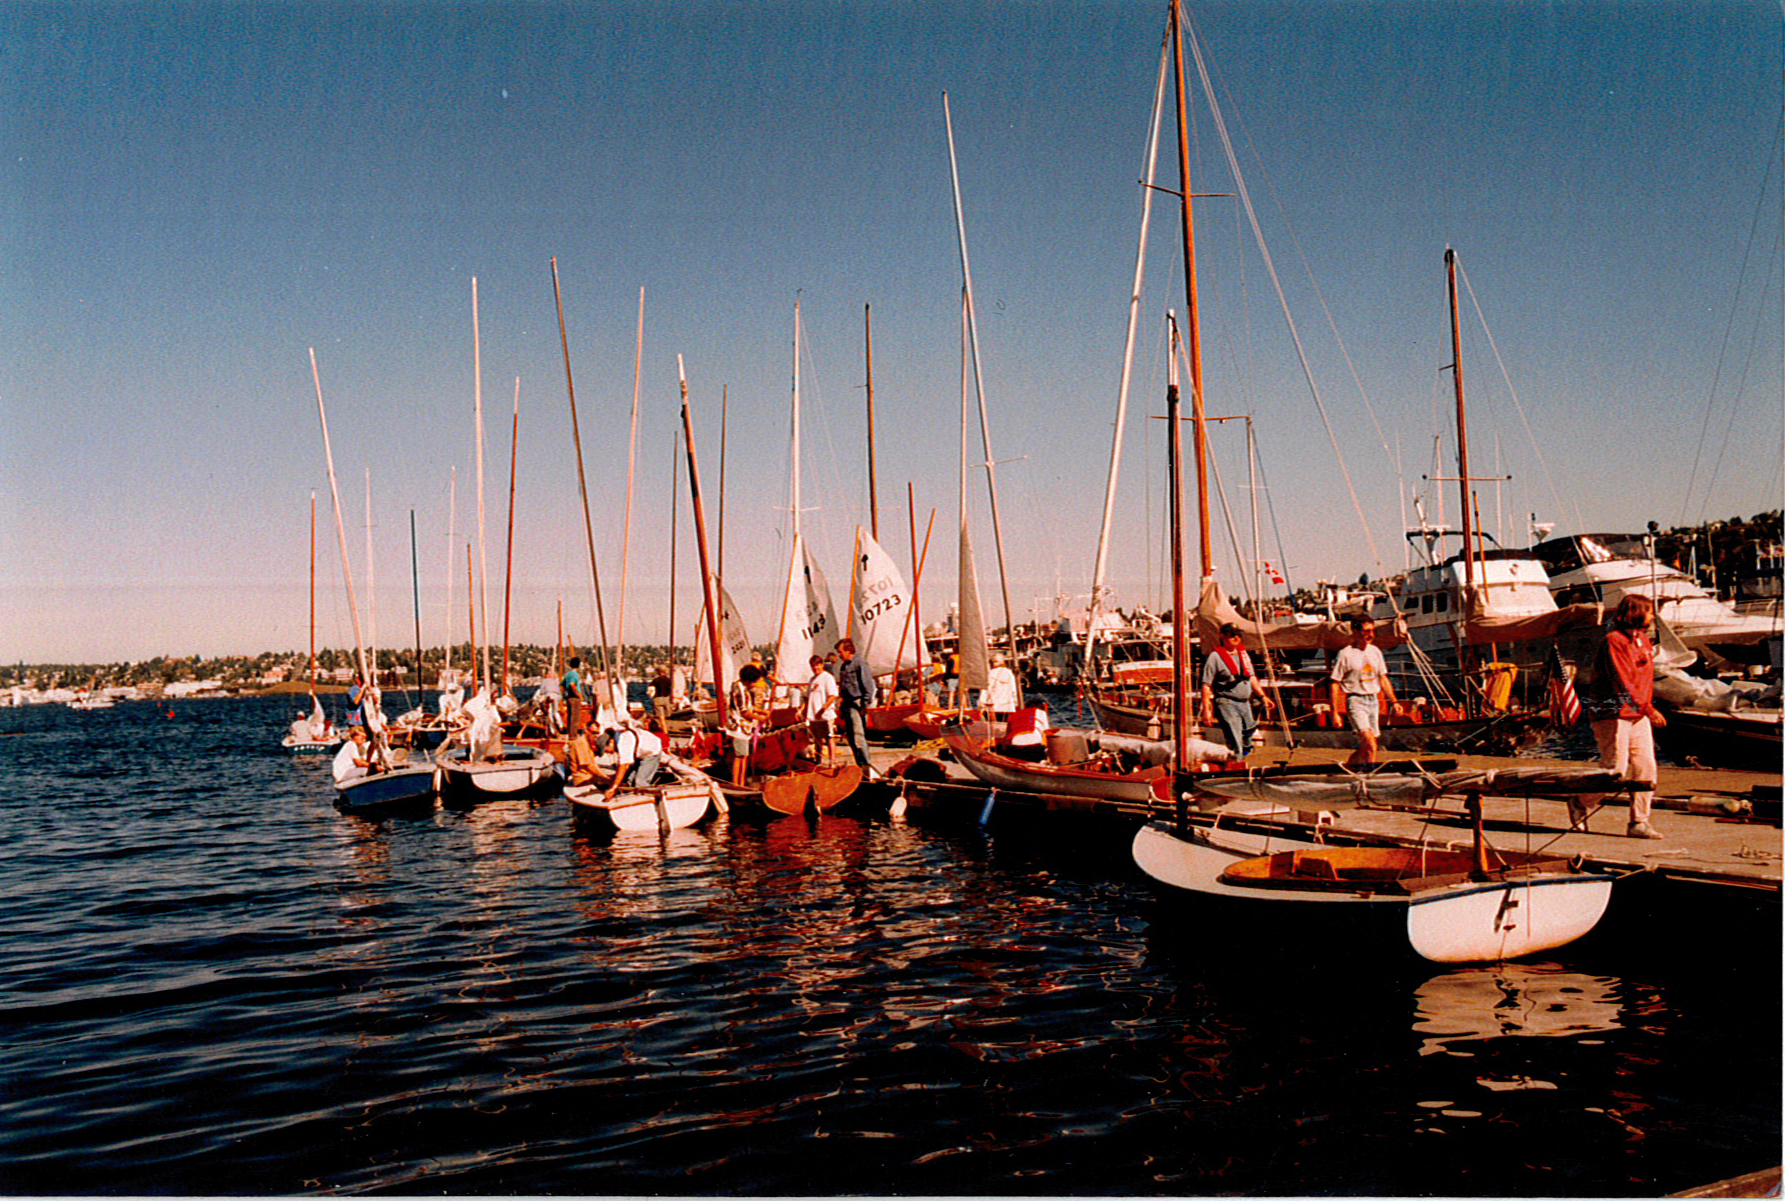 Docks with rigged sailbots and volunteers in the 1980s